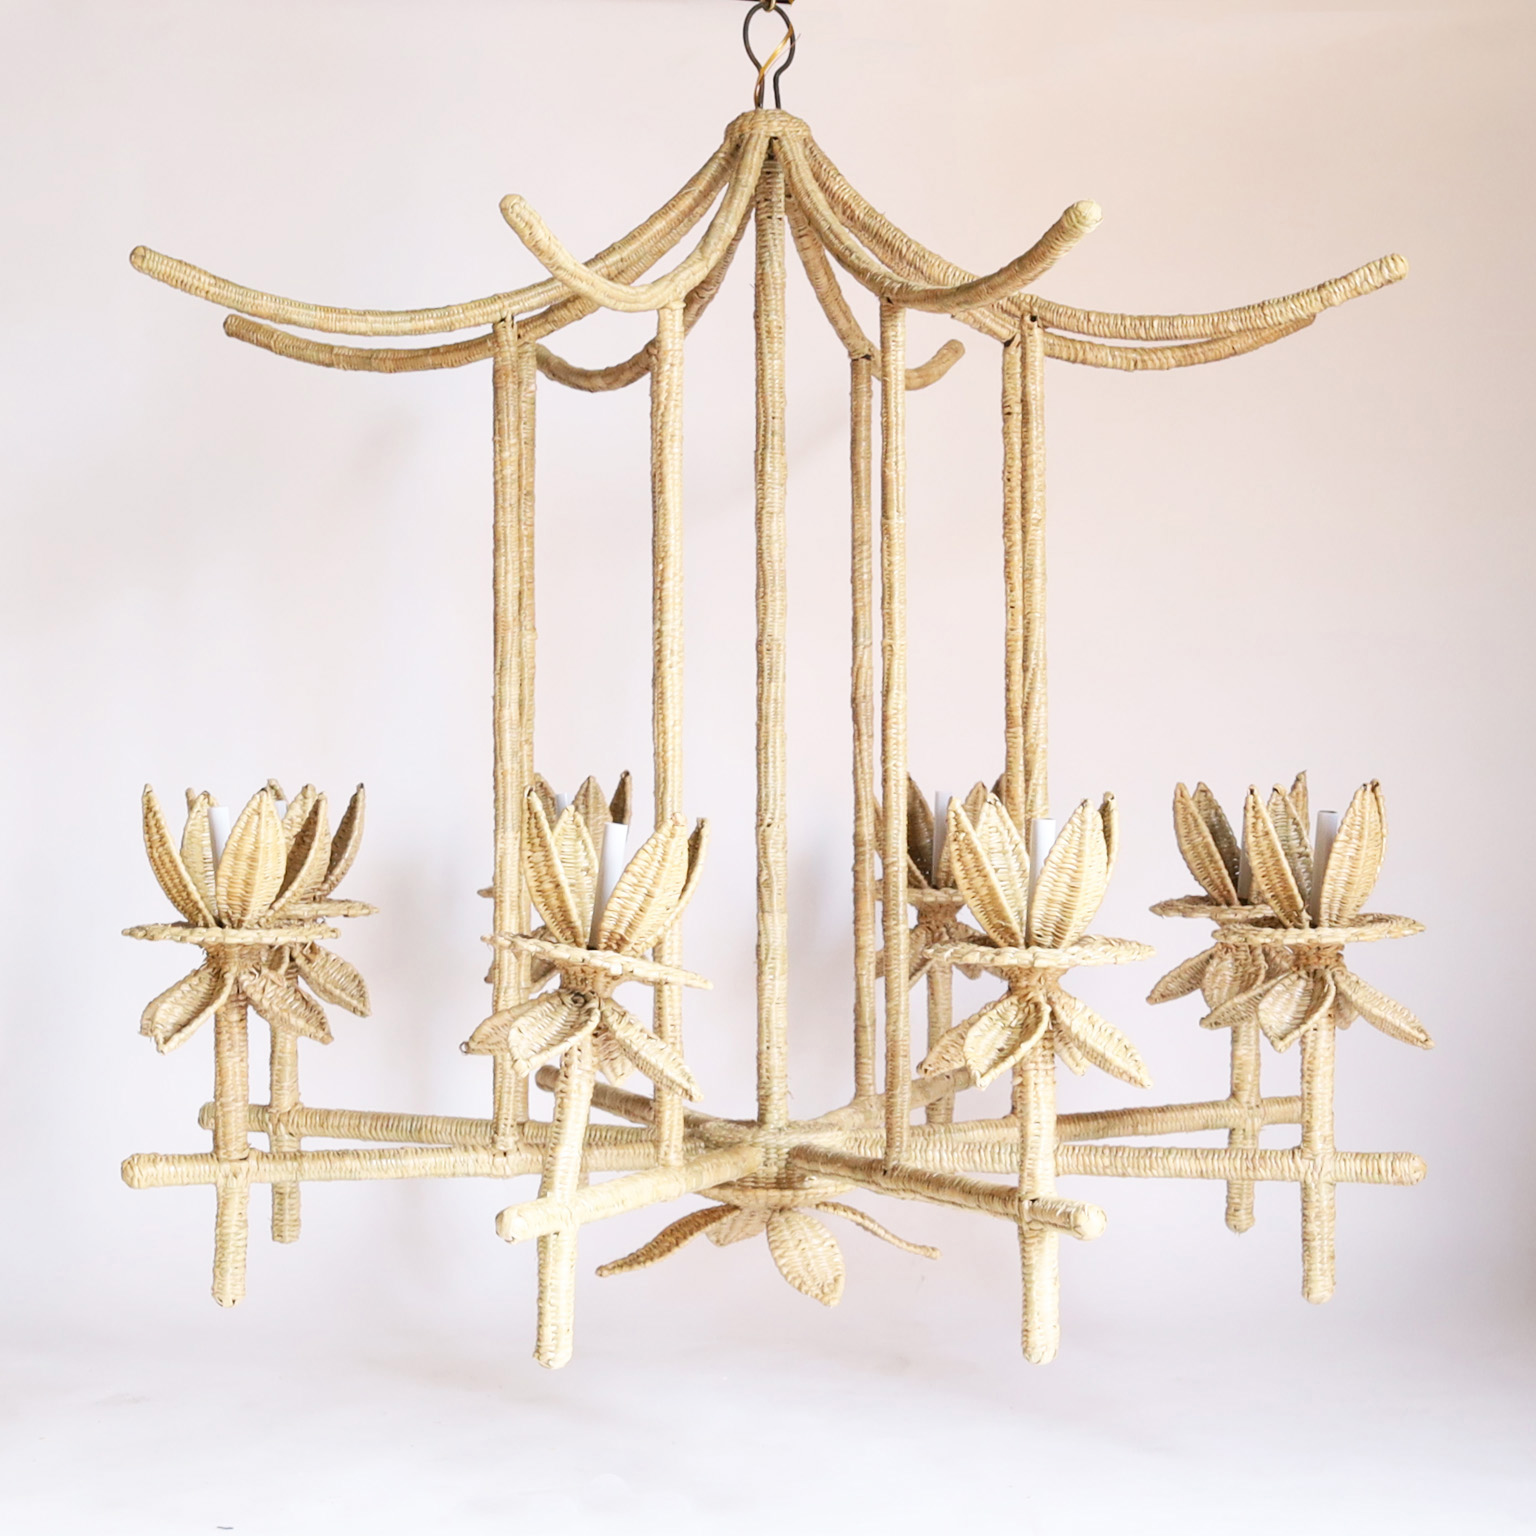 Woven Reed Pagoda Form Chandelier or Light Fixture from the FS Flores Collection